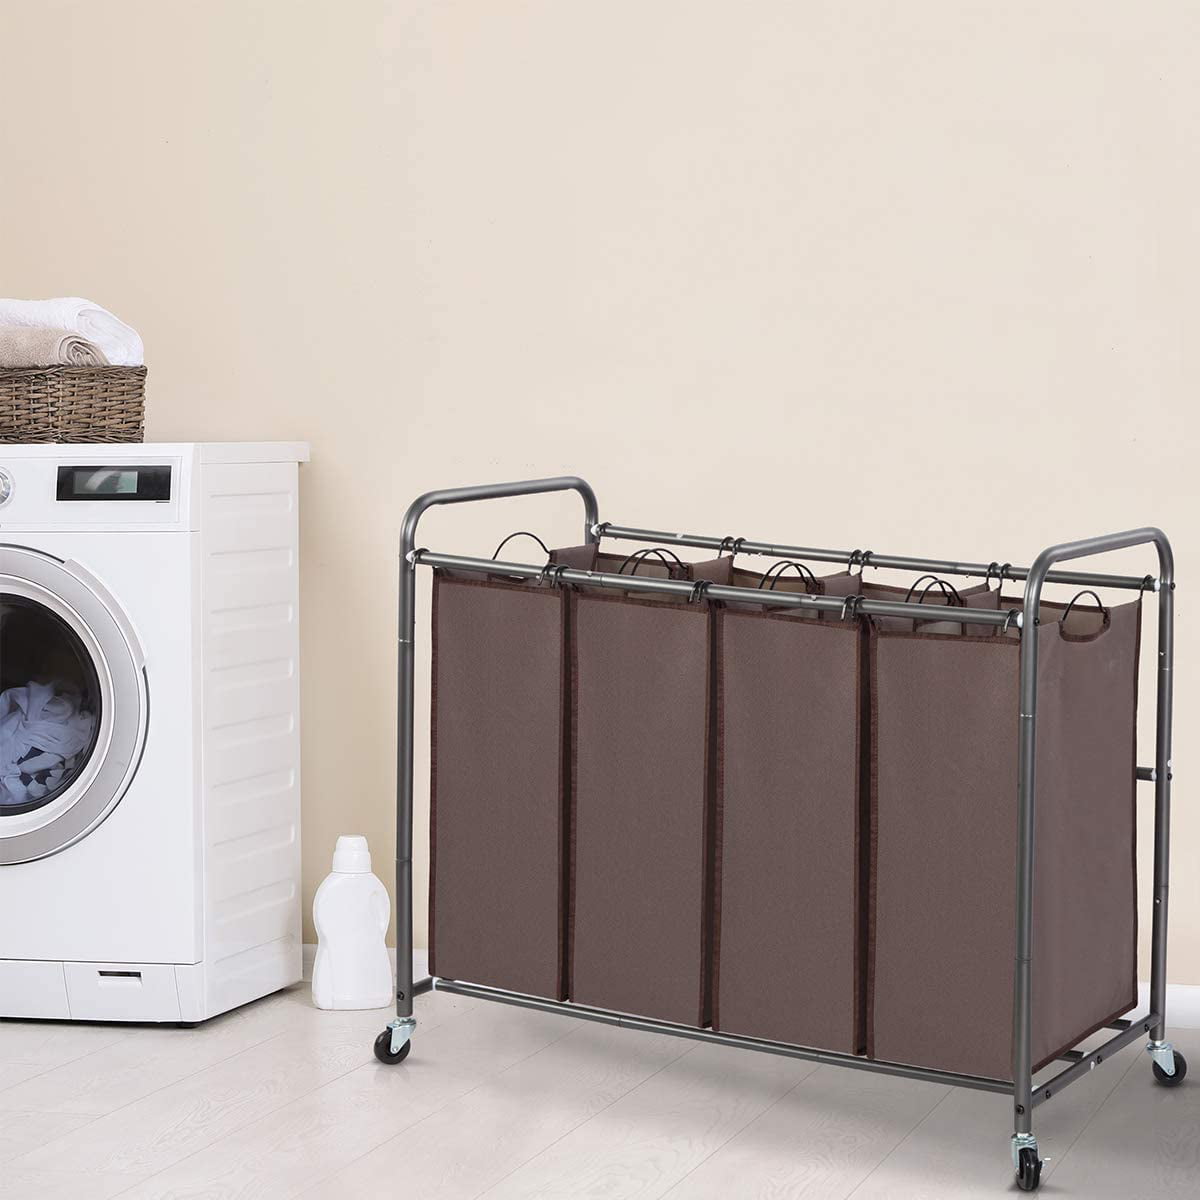 Laundry Clothes Sorter Basket Storage Maniac 3-Section Heavy-Duty Rolling Cart